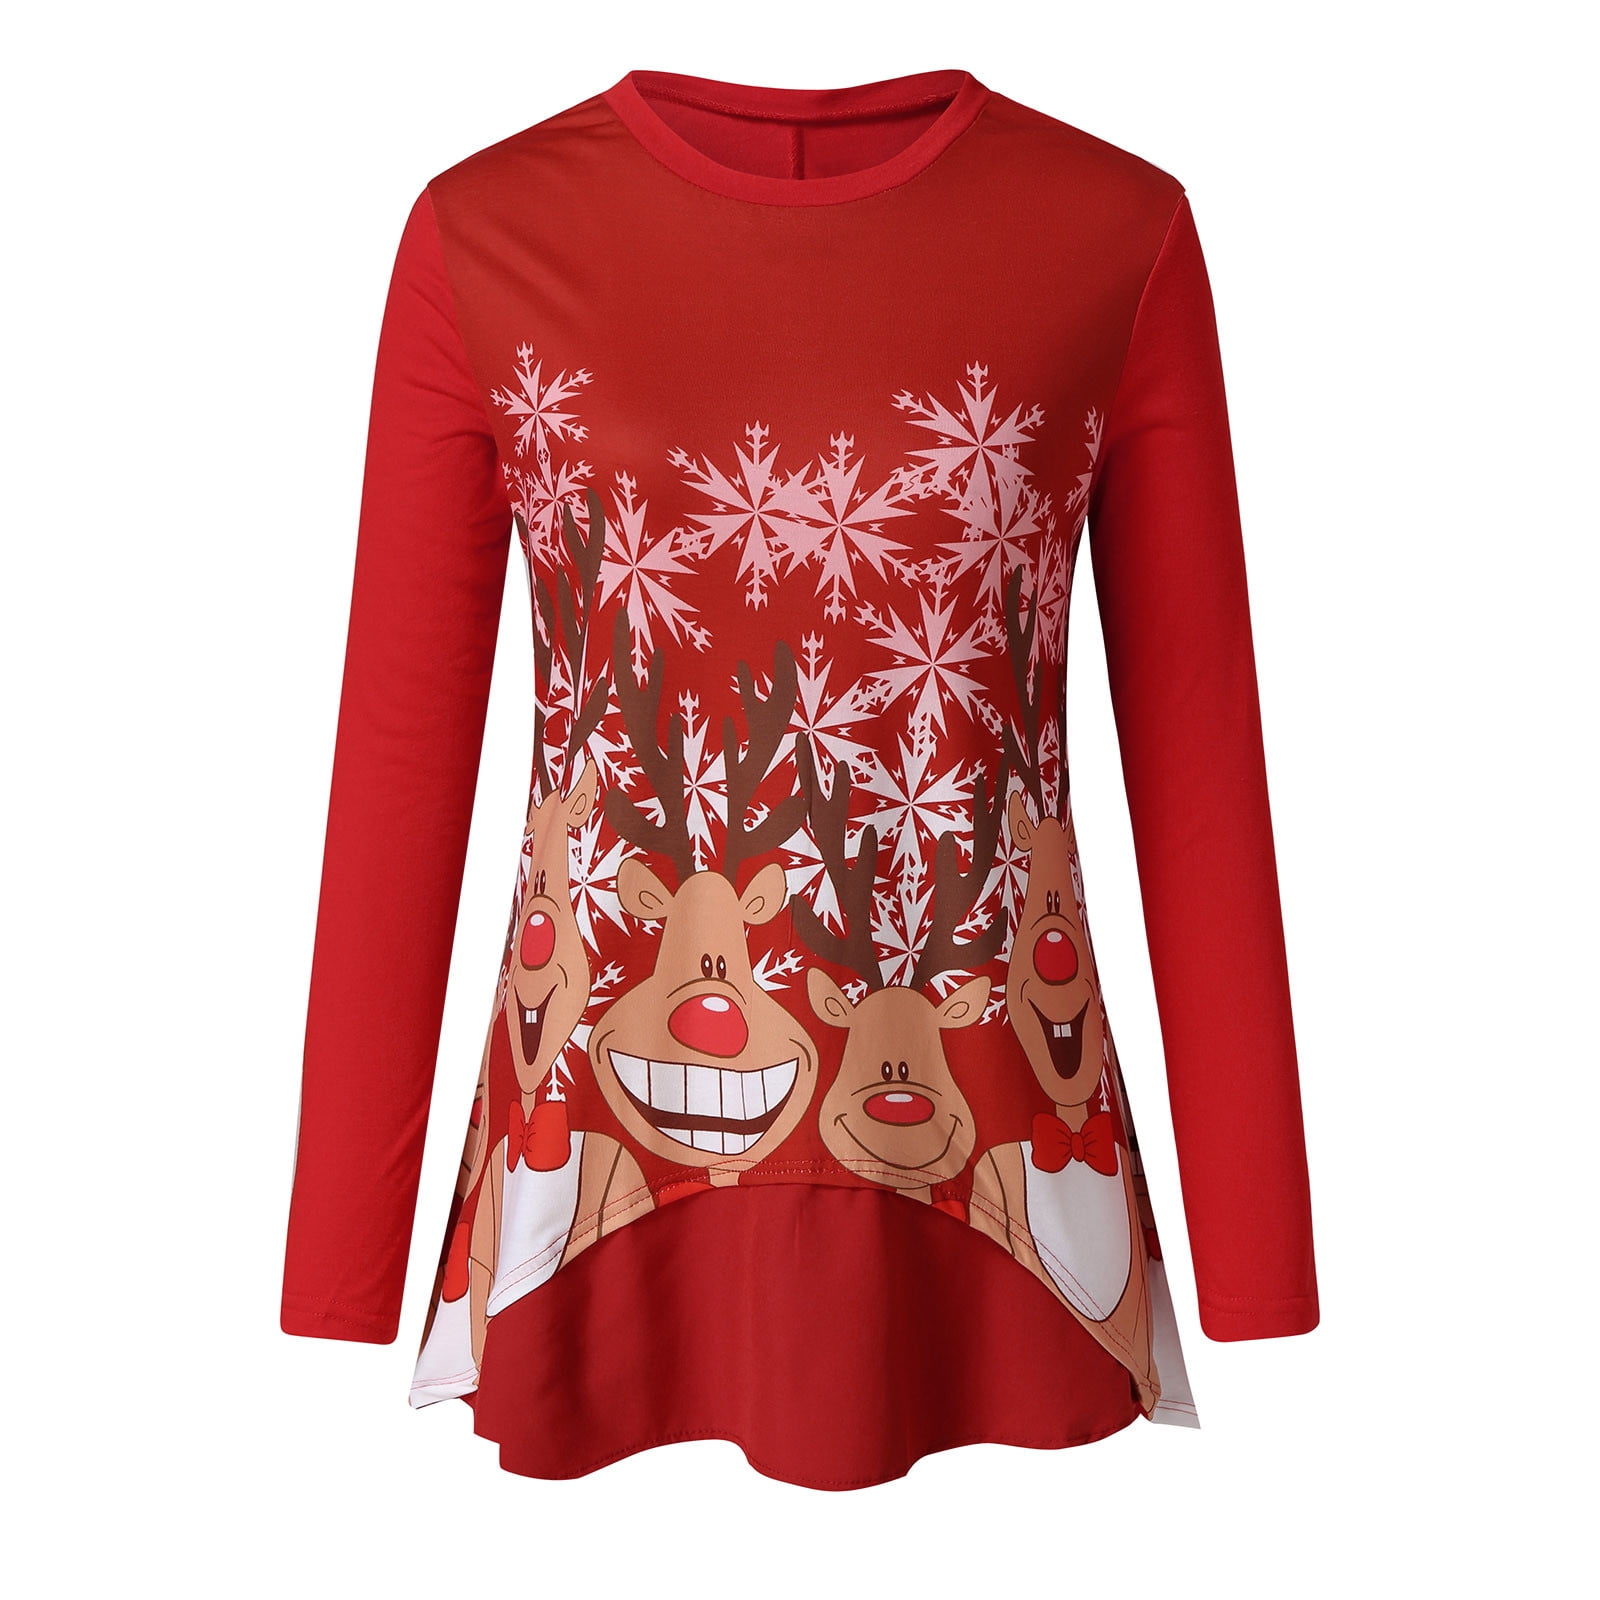 Long Sleeve Shirts Women Cute Christmas Tree Snowman Graphic Tee Tshirts Casual Loose Tunic Tops to Wear with Leggings 